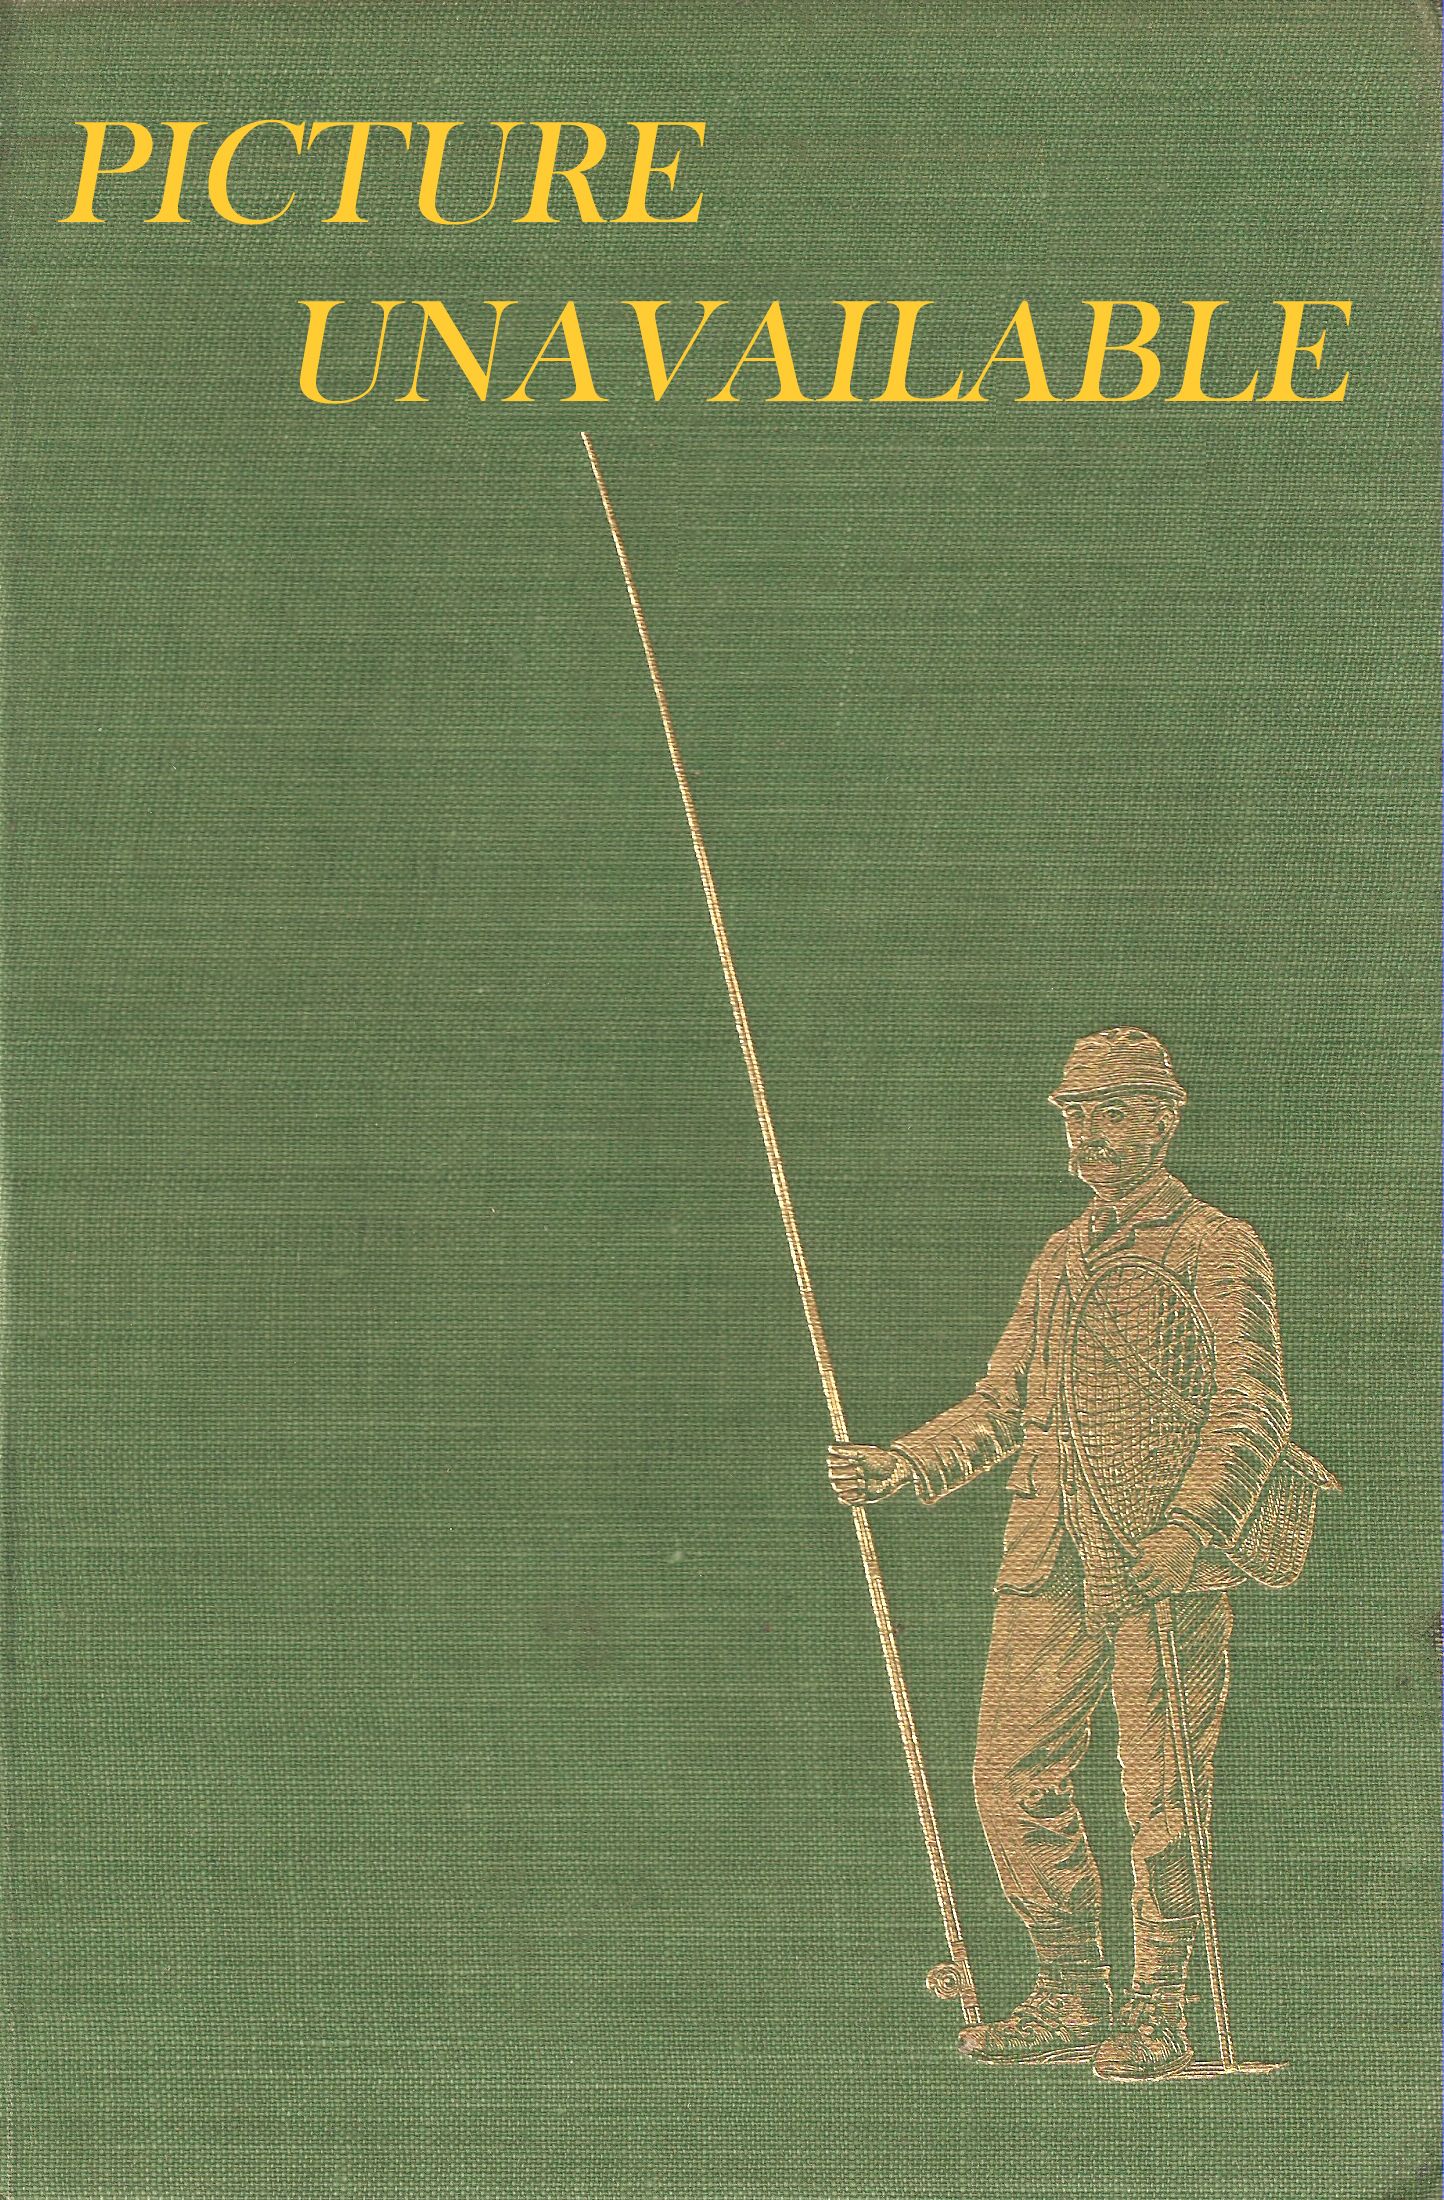 BEGINNER'S GUIDE TO COARSE FISHING. By Arthur E. Hardy. With notes on  tackle by Alan Vare.